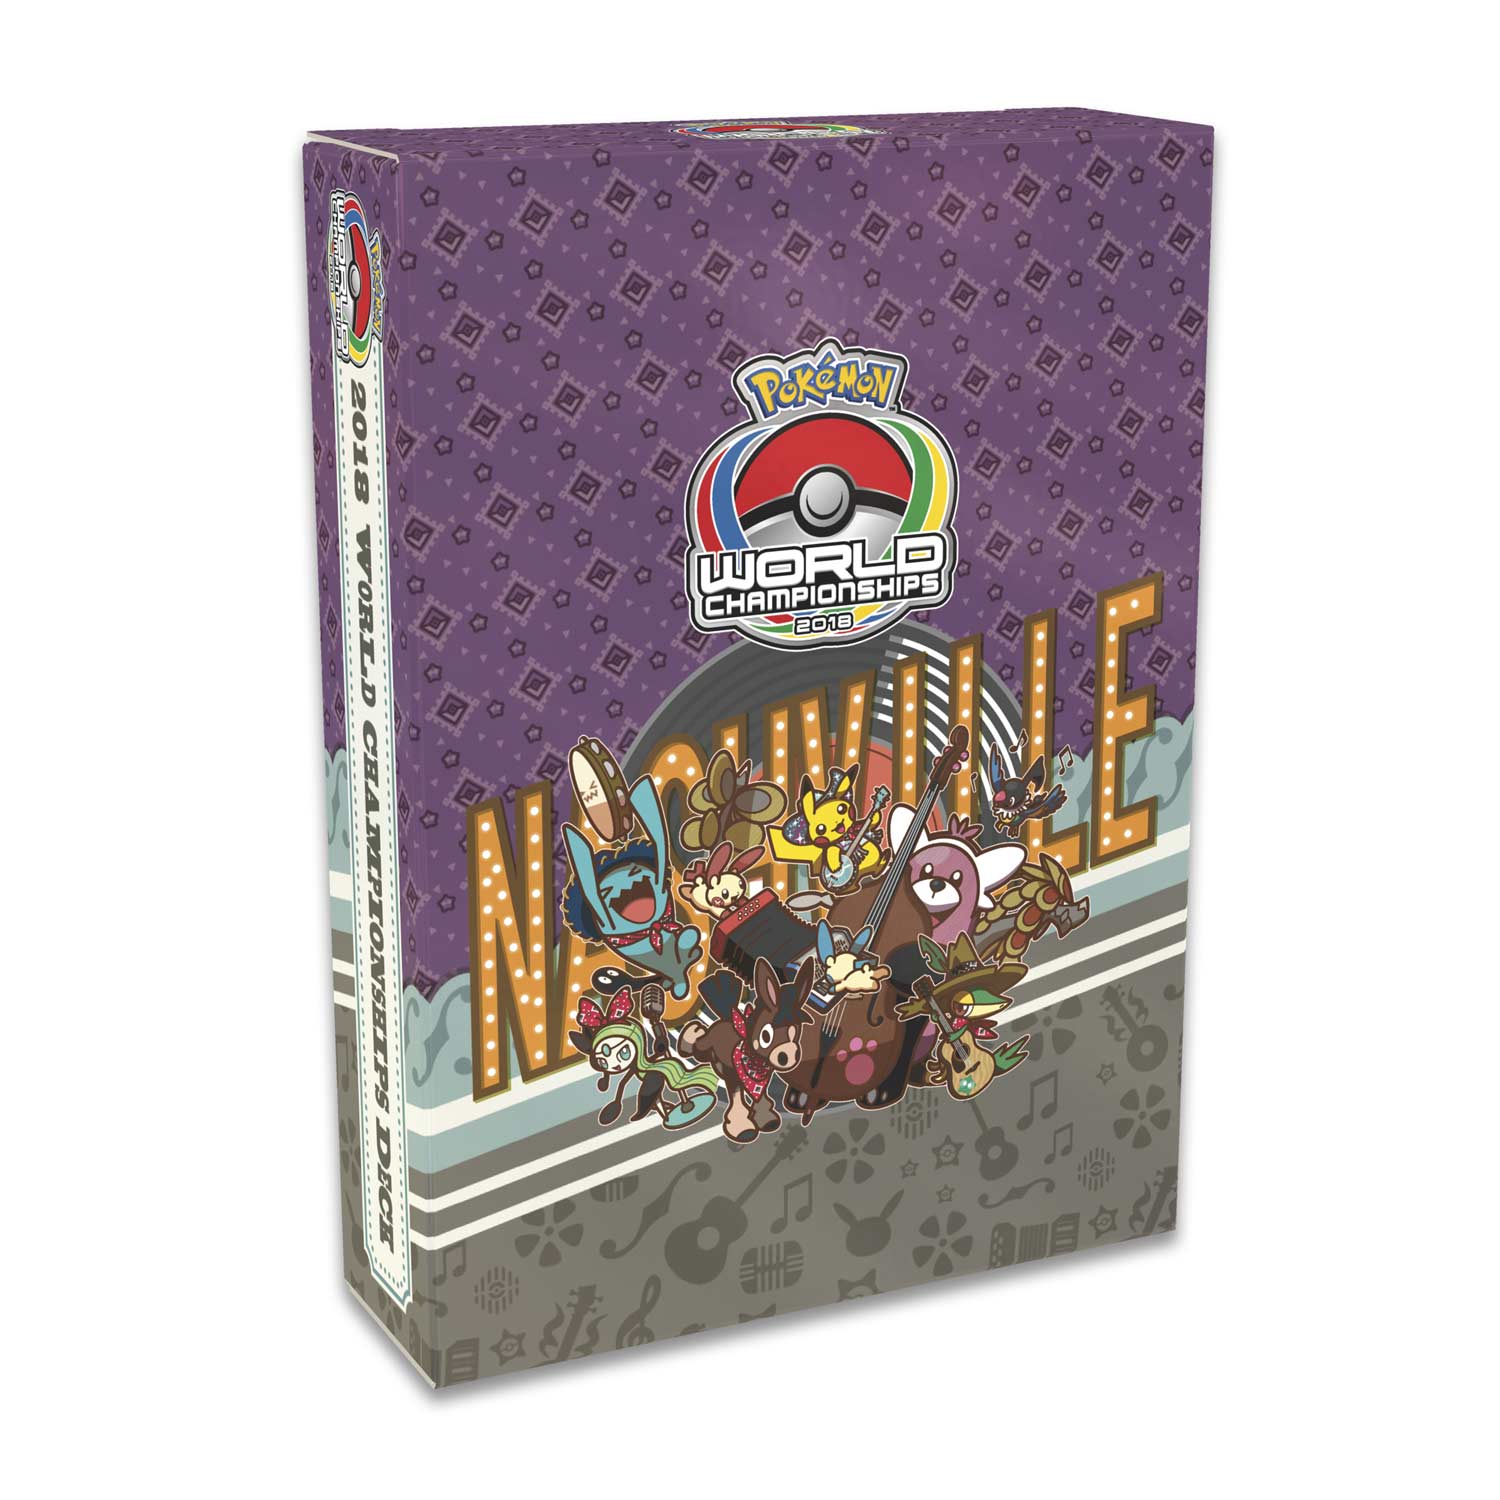 Sleeve and Coin Digital Gameplay for Pokemon TCG Online Worlds 2013 Deckbox 